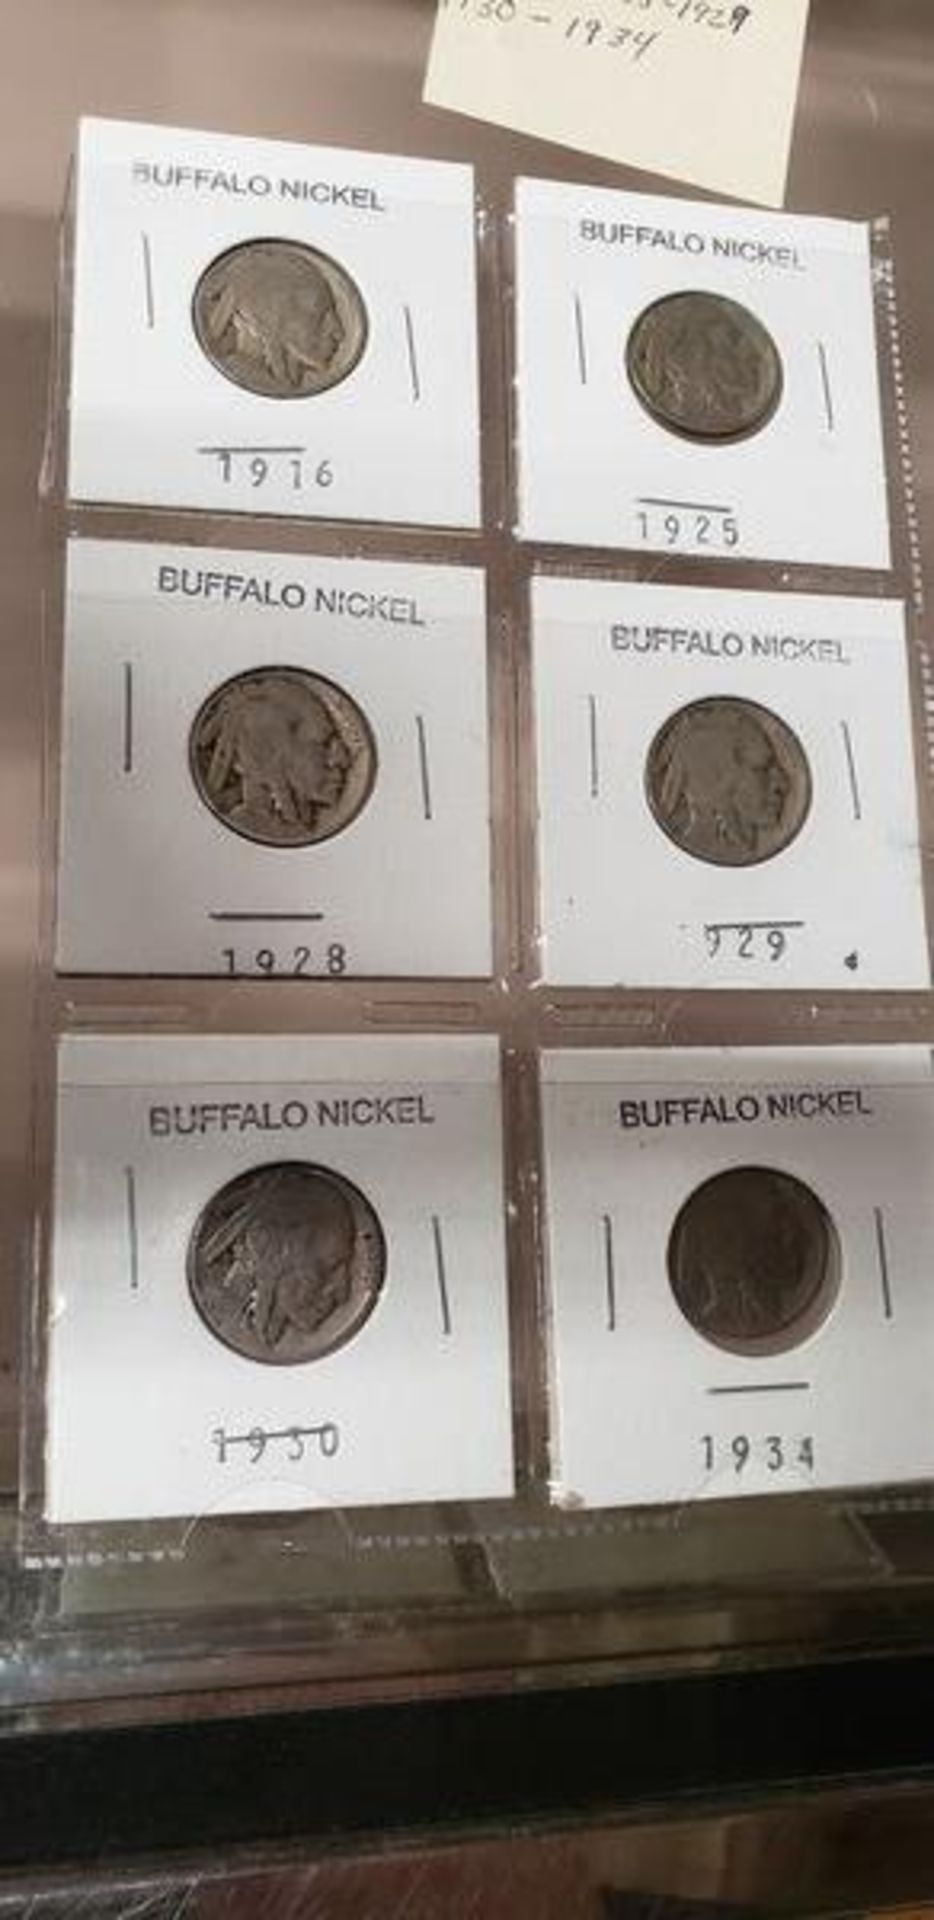 LOT OF 6 BUFFALO NICKELS 1916, 1925, 1928, 1929, 1930 AND 1934